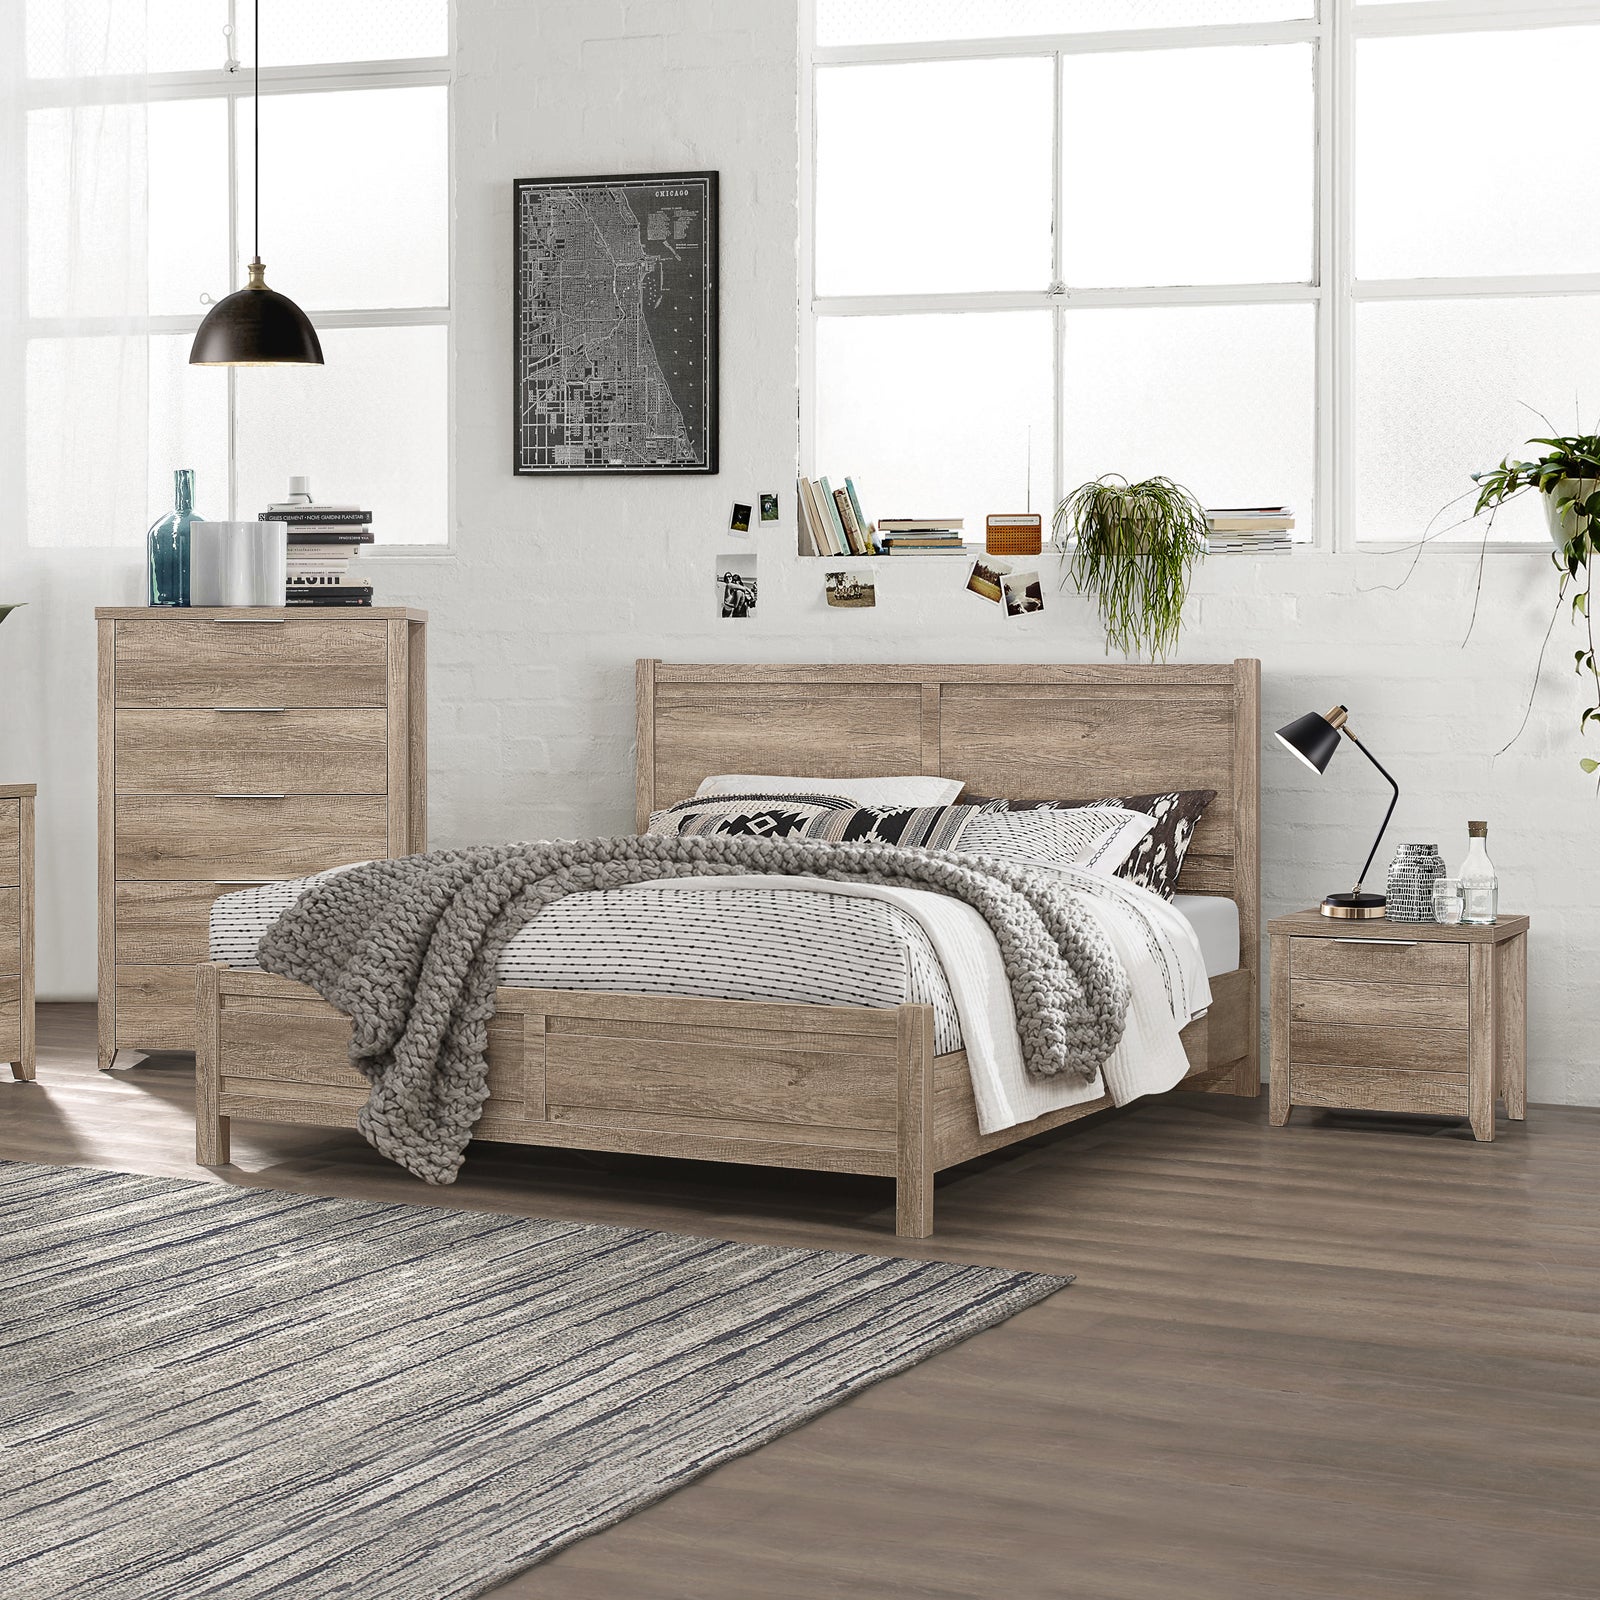 Cielo Natural Wood Like MDF Bedroom Suite 4 Pcs Queen Size White Ash Colour with Tallboy